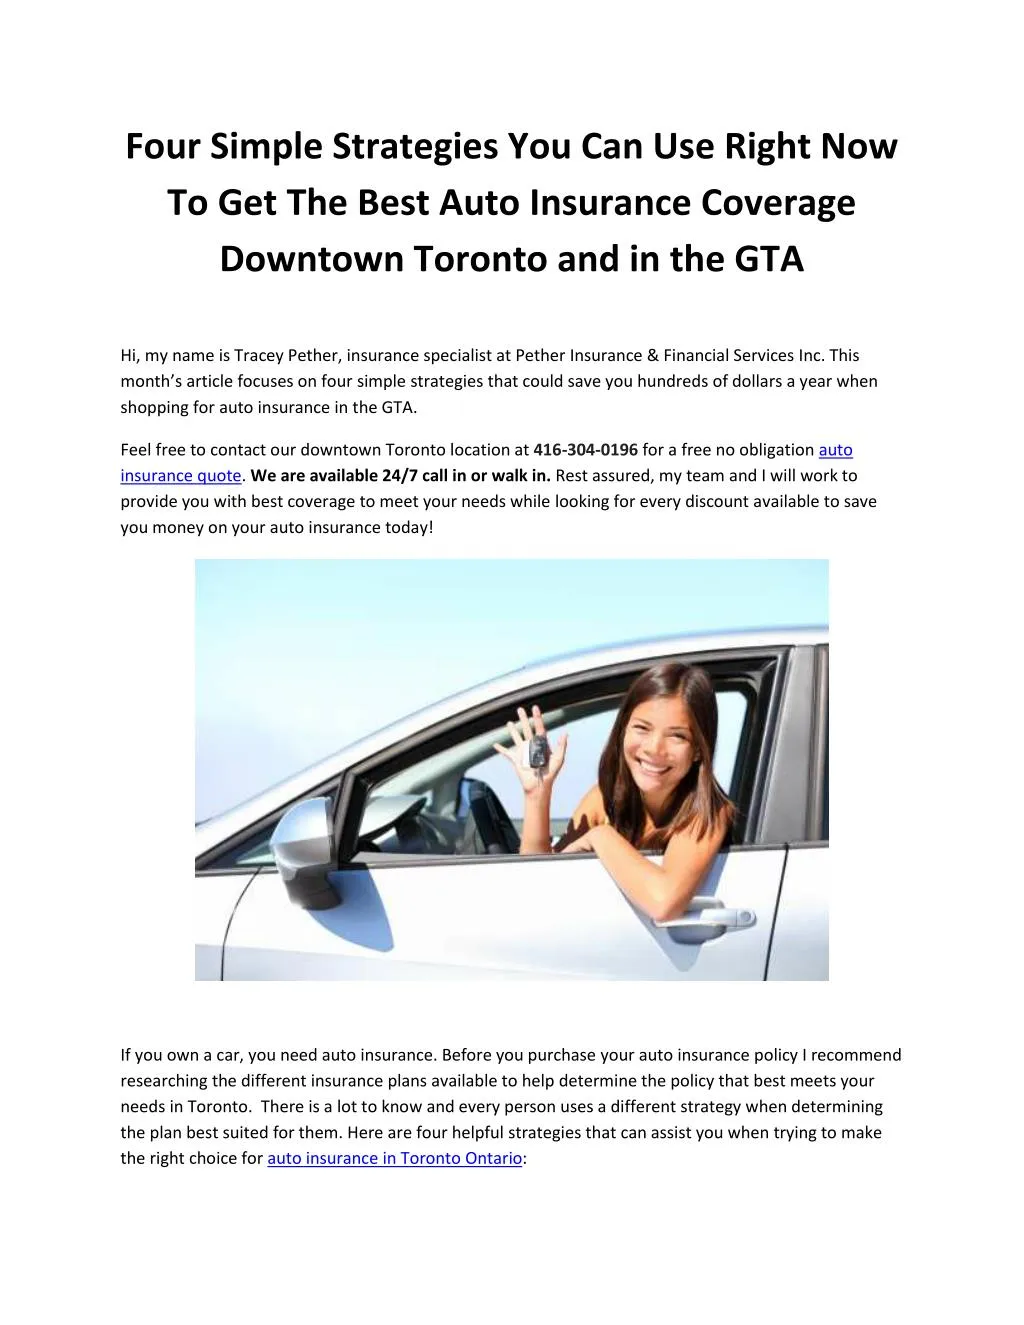 Insurance Car Toronto Quick And Easy Get An Auto Insurance Quote In Toronto Business Partner